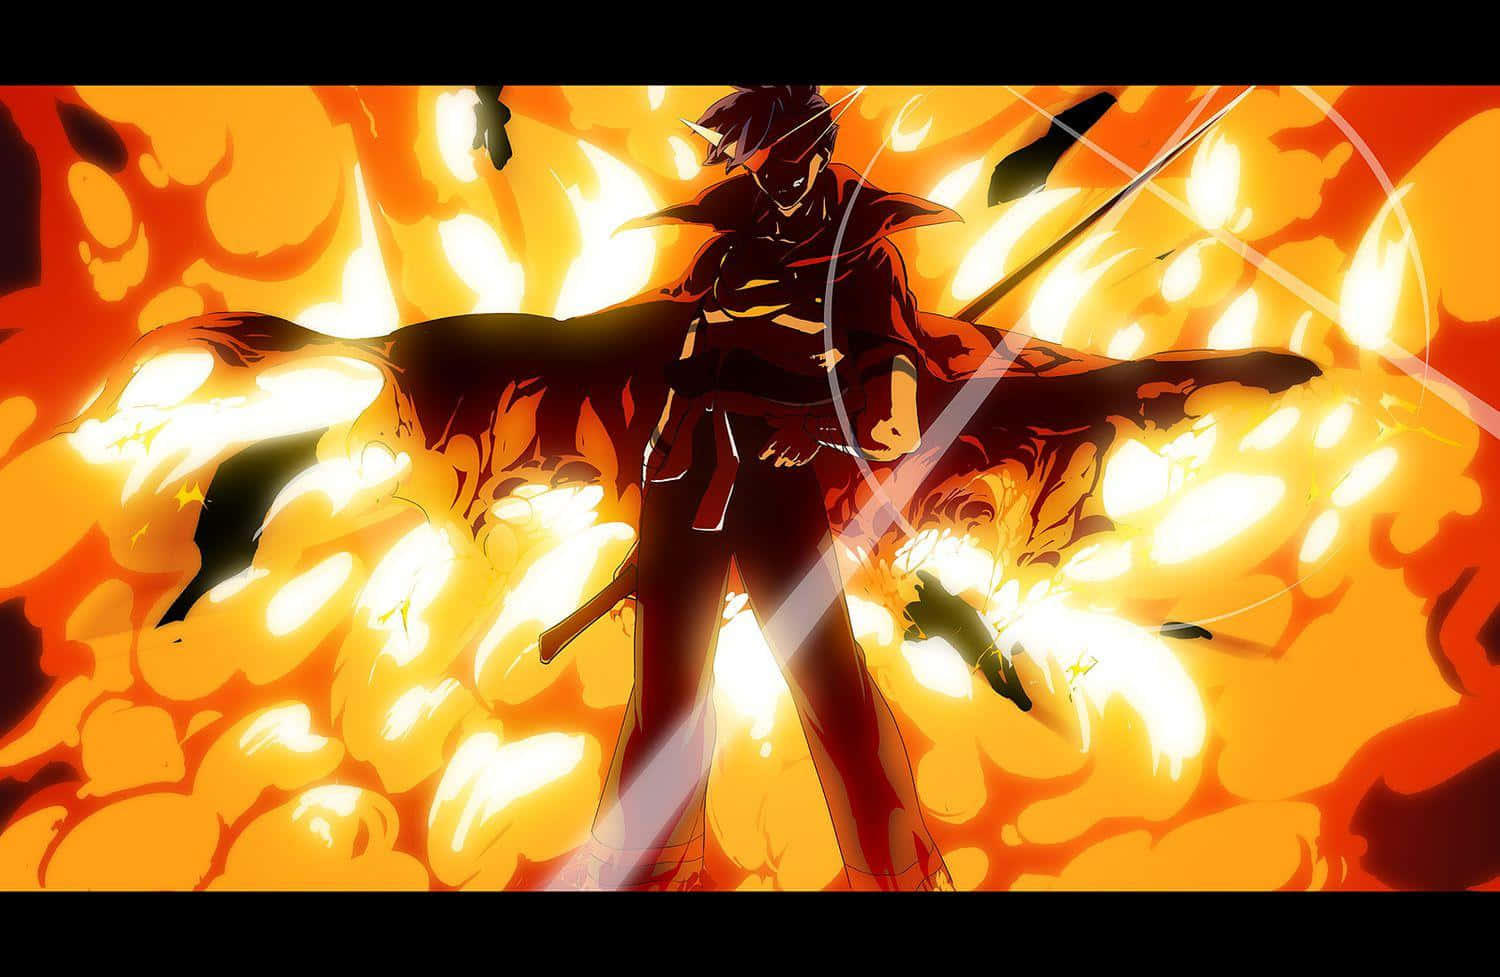 Gurren Lagann Kamina with his iconic cape and sunglasses in an action pose. Wallpaper